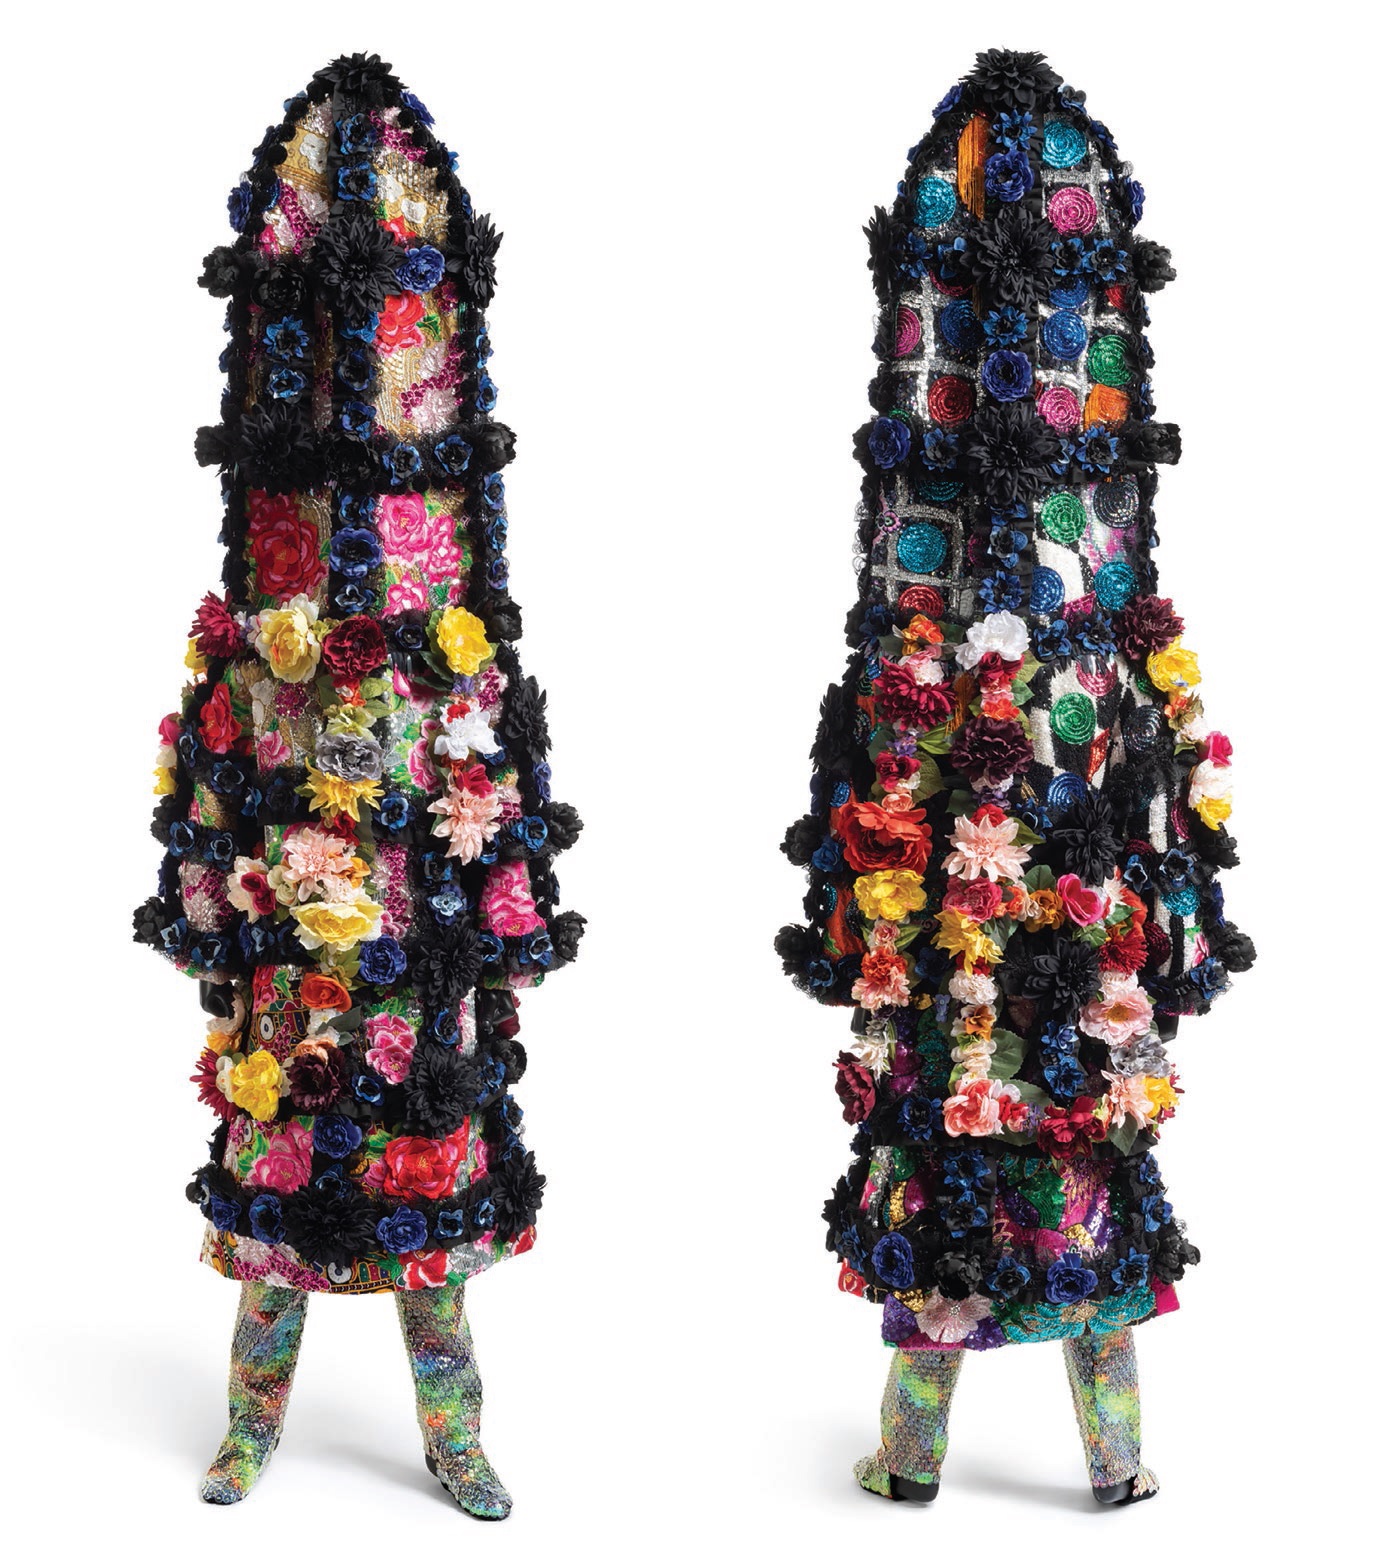 “Soundsuit 8:46” (2021, mixed media including vintage textile and sequined appliqués, metal and mannequin), 102 inches by 29 inches by 29 inches PHOTO COURTESY OF THE ARTIST AND JACK SHAINMAN GALLERY, NEW YORK